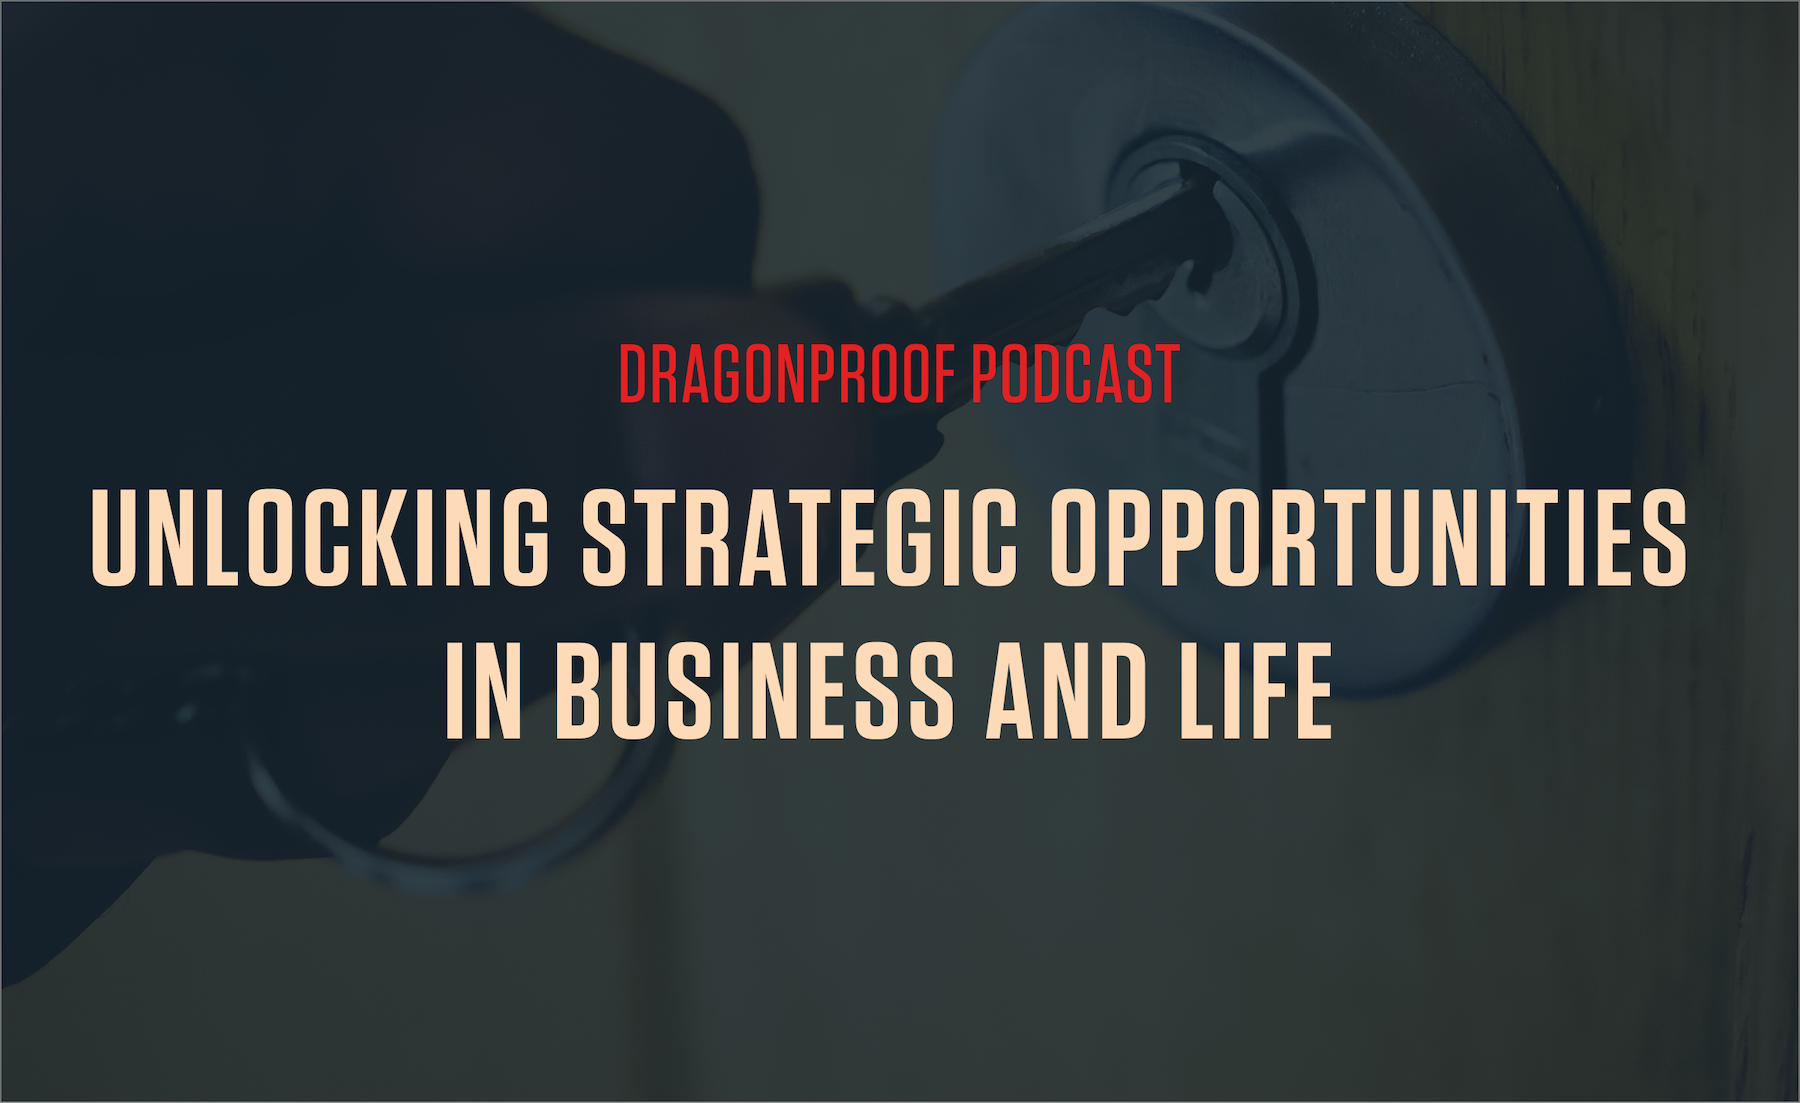 New Dragonproof Podcast: Unlocking Strategic Opportunities In Business and Life